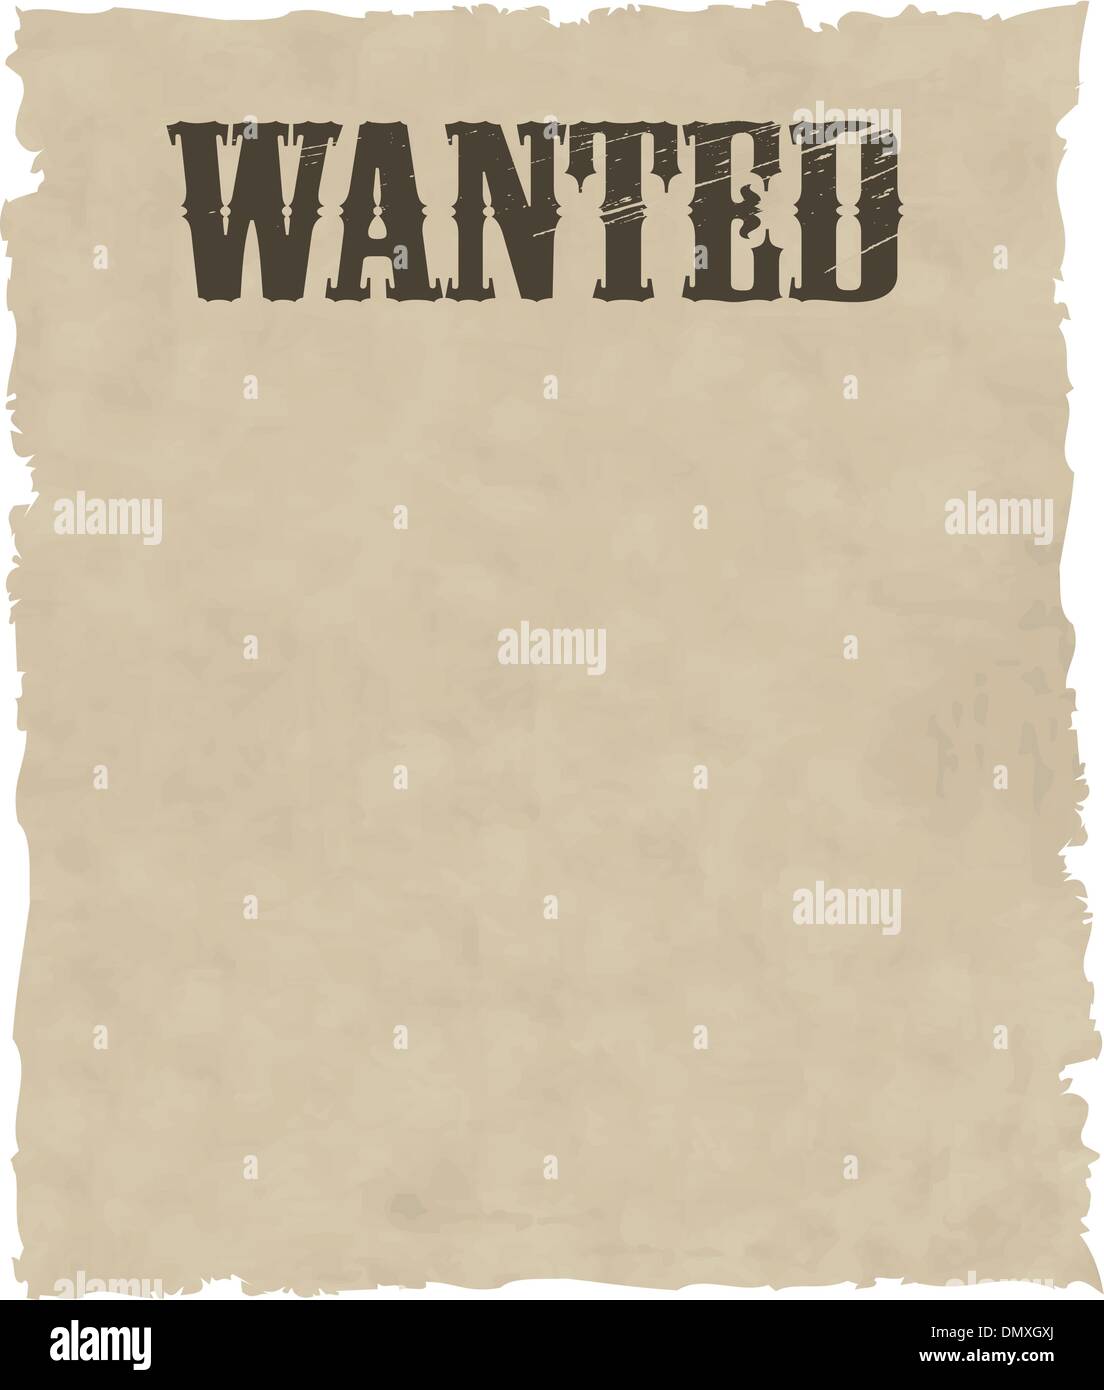 the vector wanted poster image Stock Vector